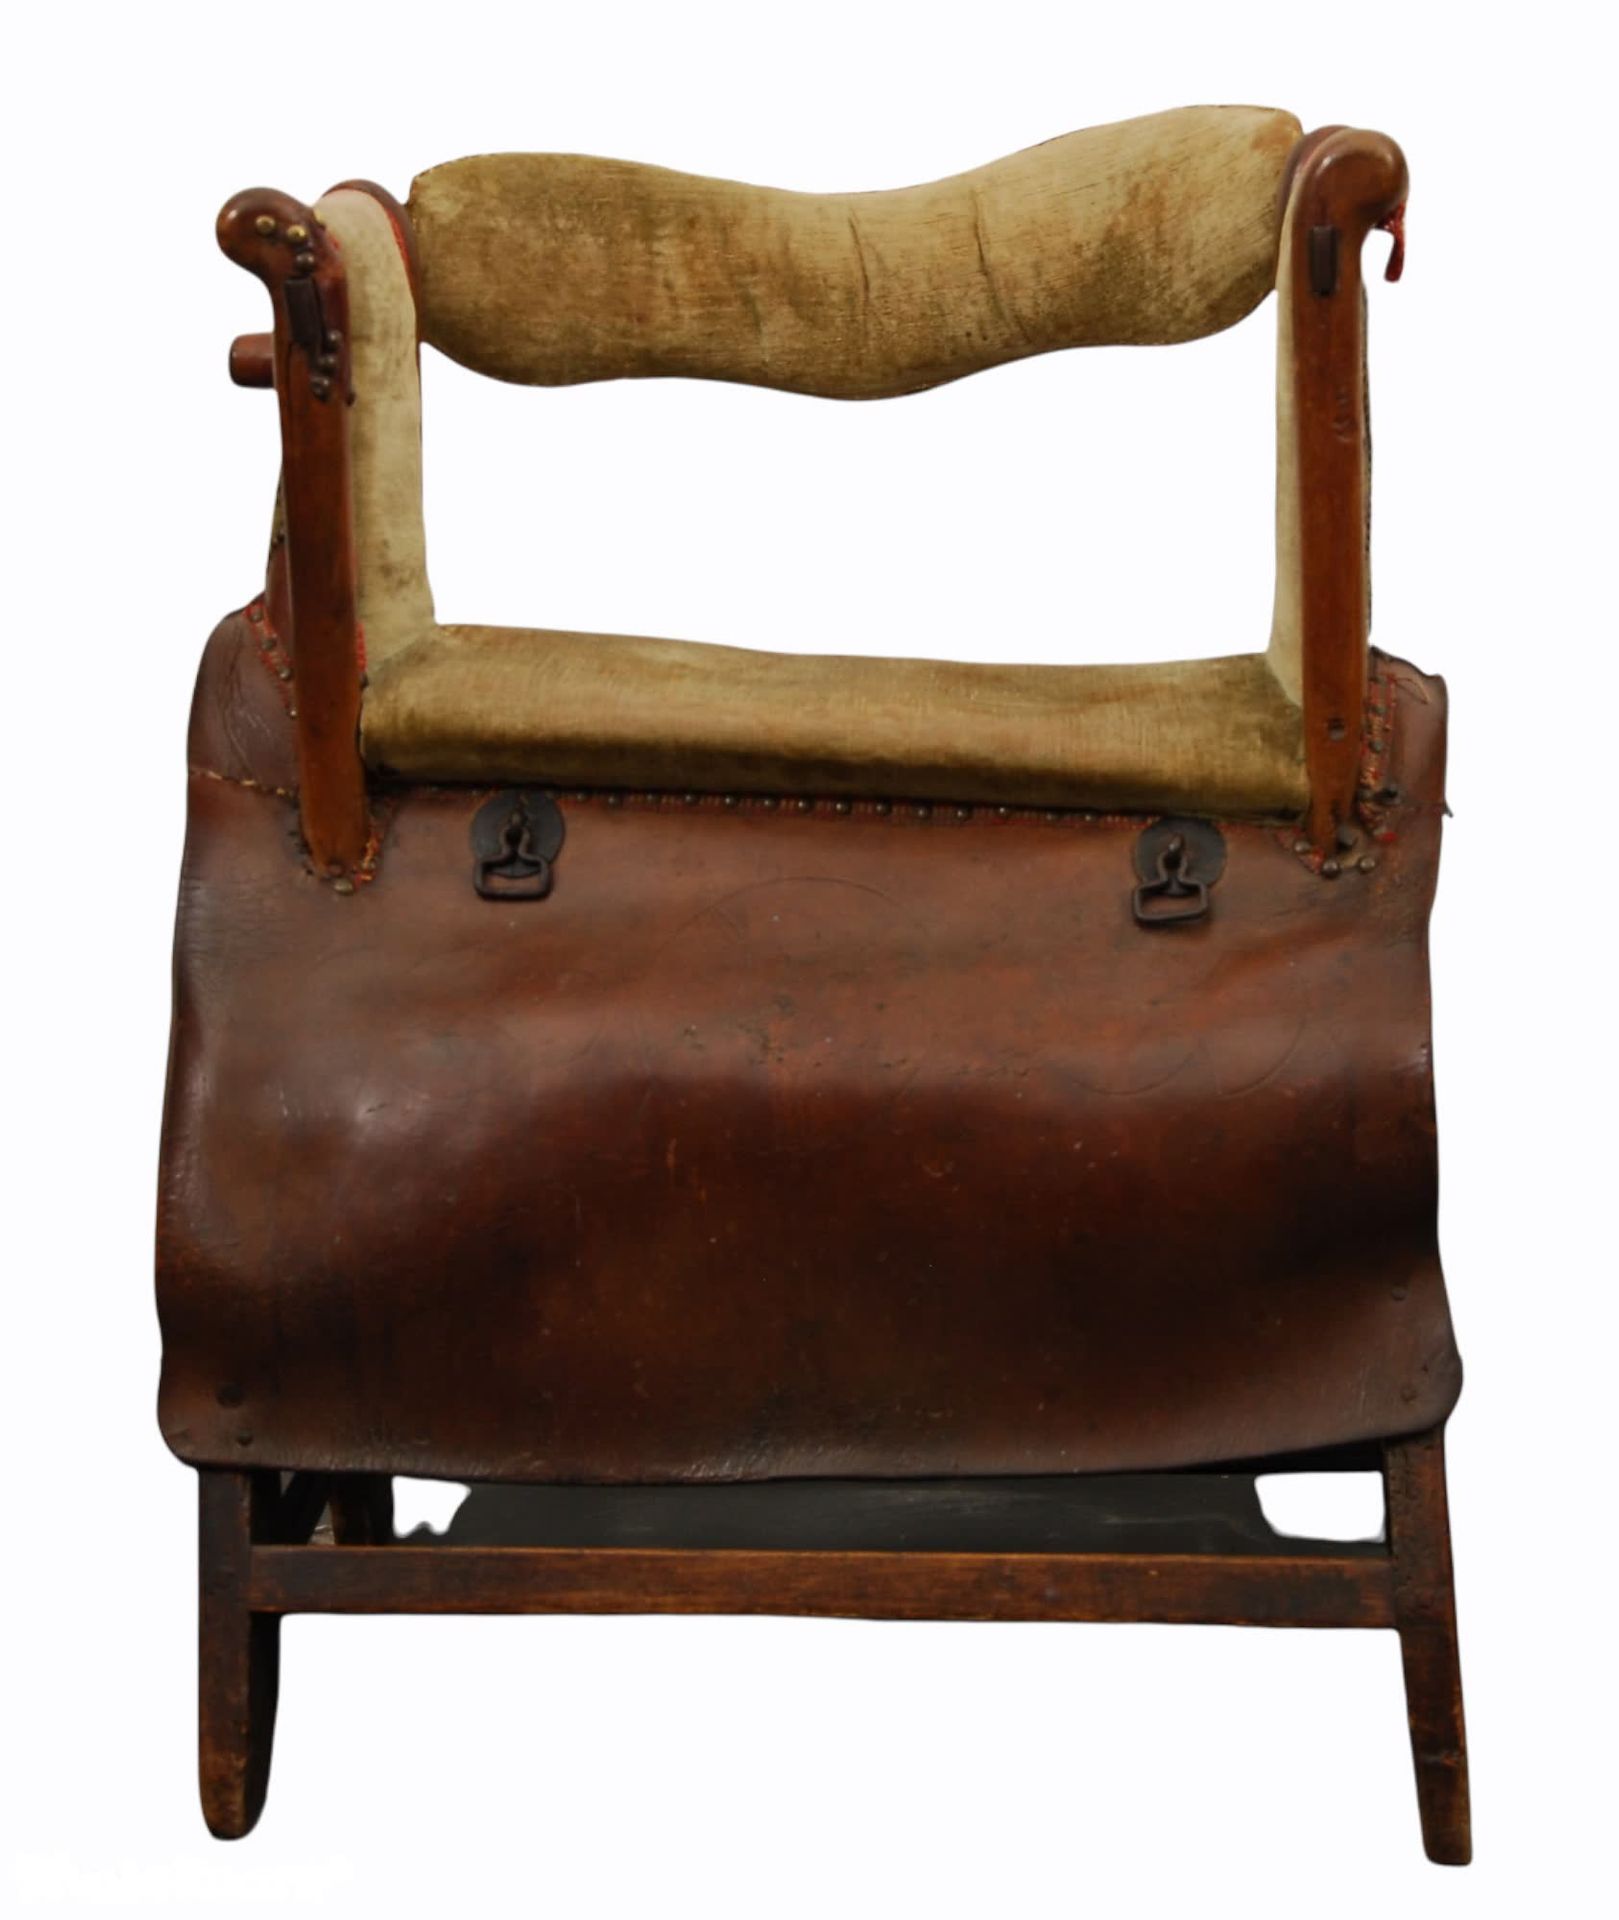 Null A saddle
Wood furnished with beige velvet and leather.
77 x 61 x 50 cm.